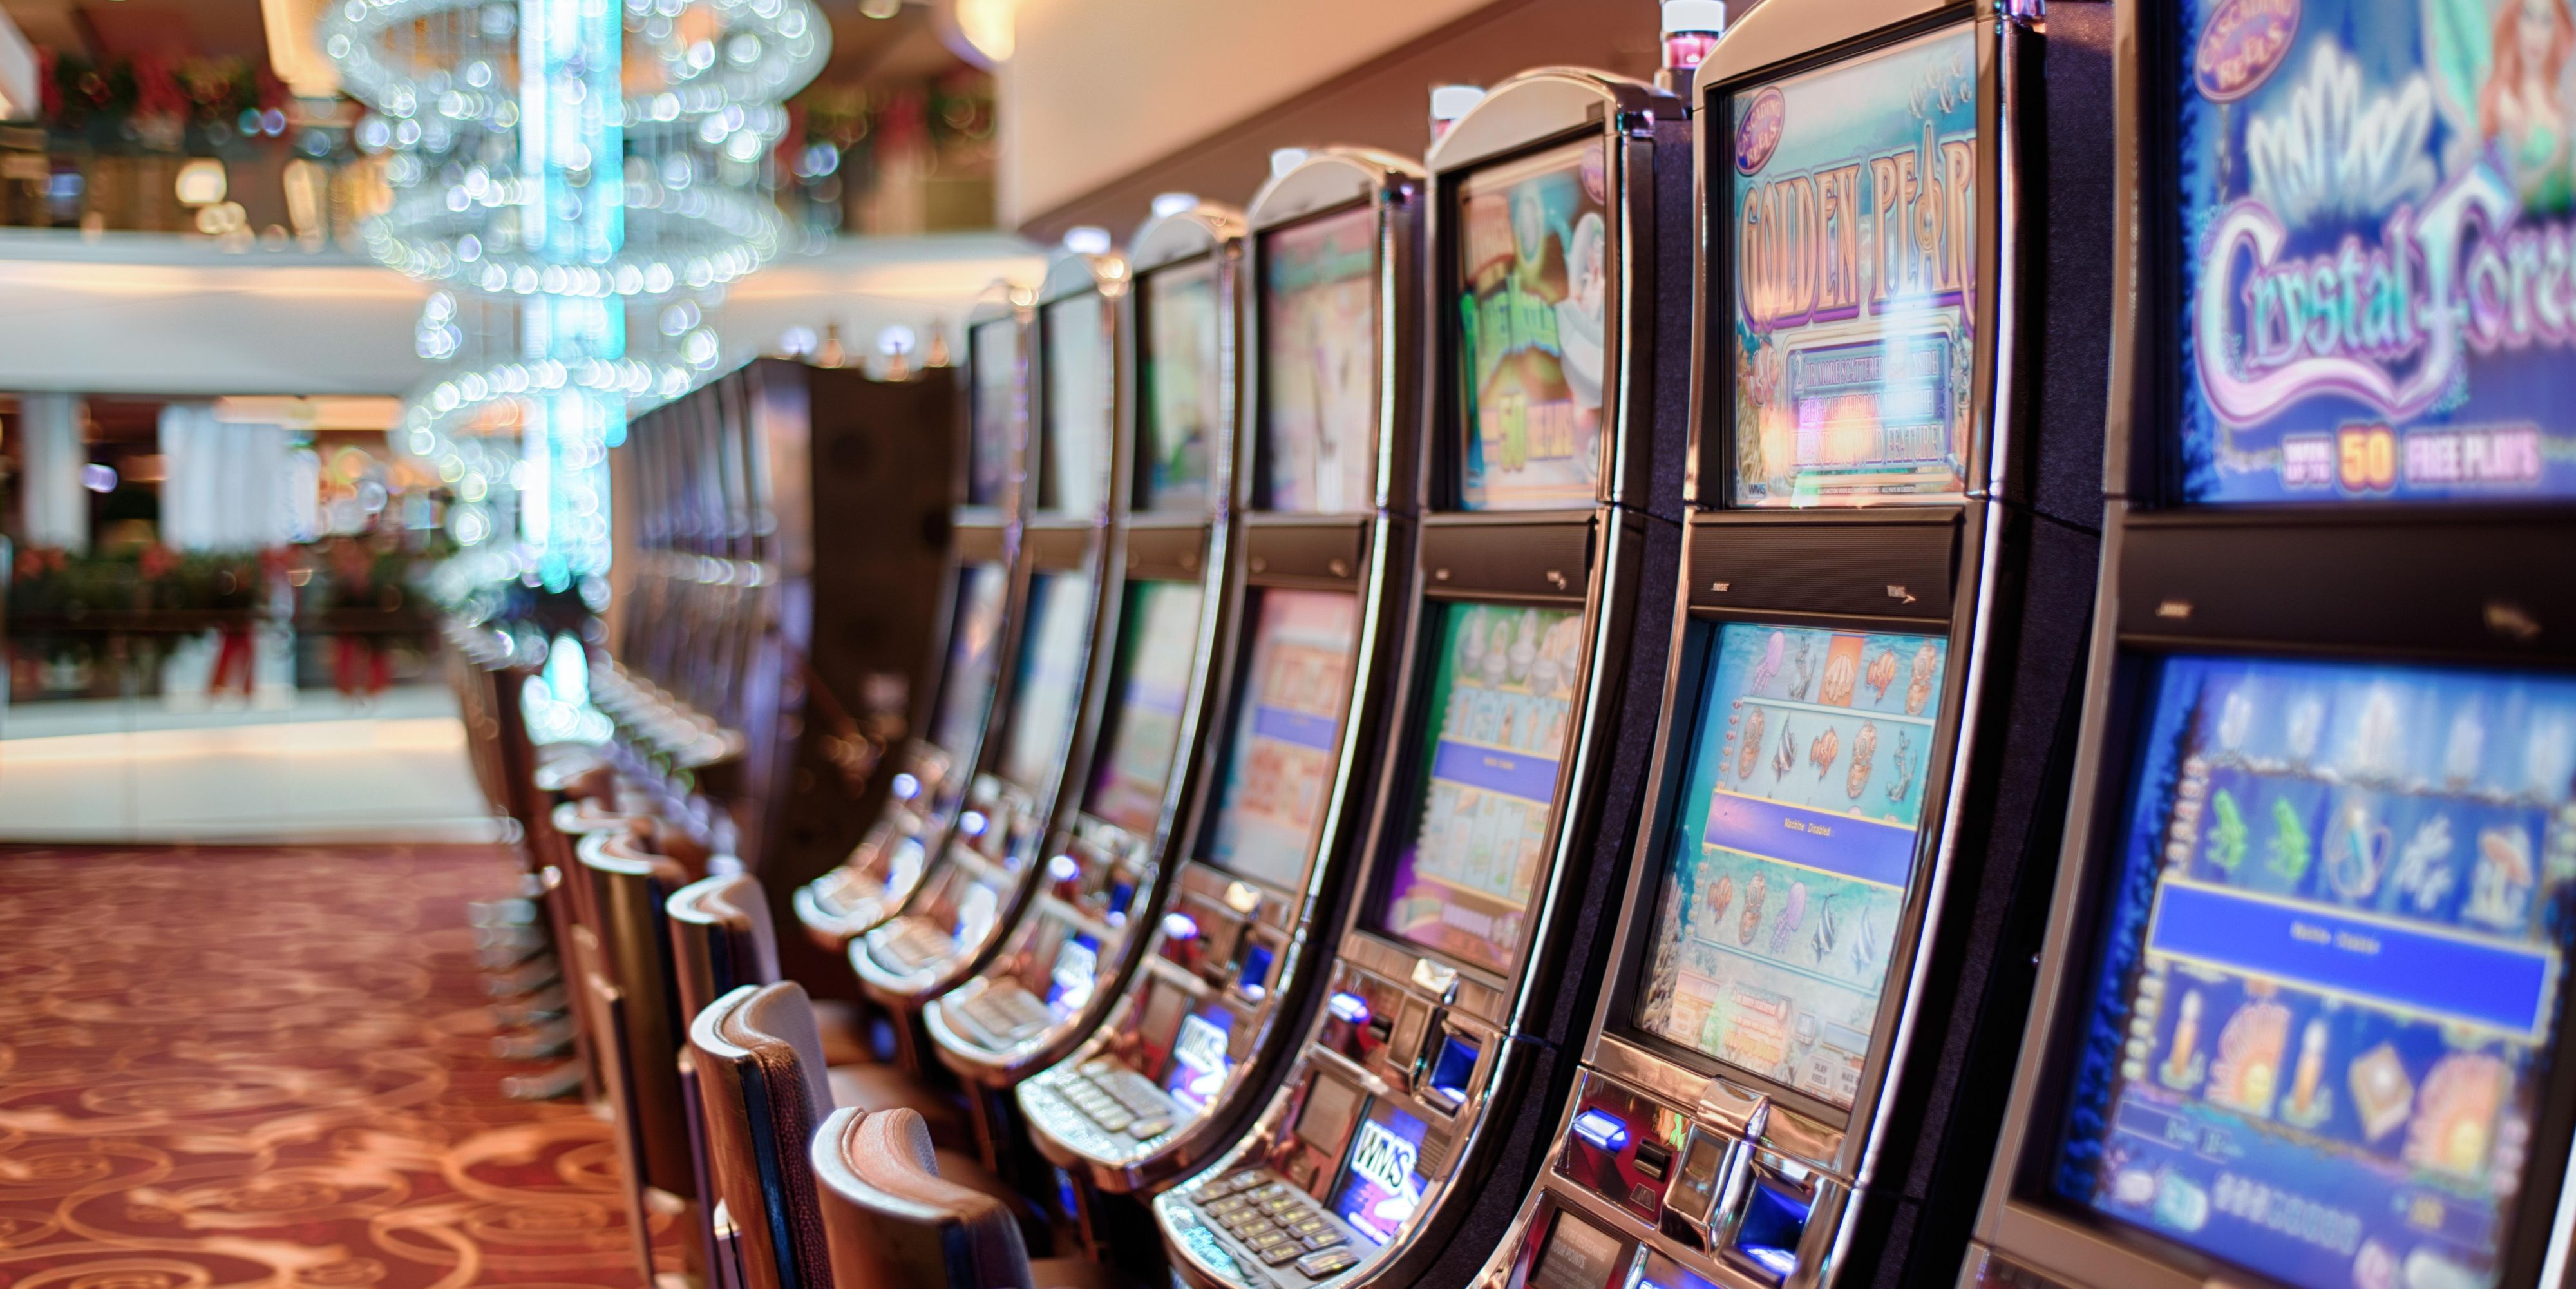 Try your luck with slot machines, cards and much more at the nearby Choctaw Casino or book a spa day to rejuvenate!  